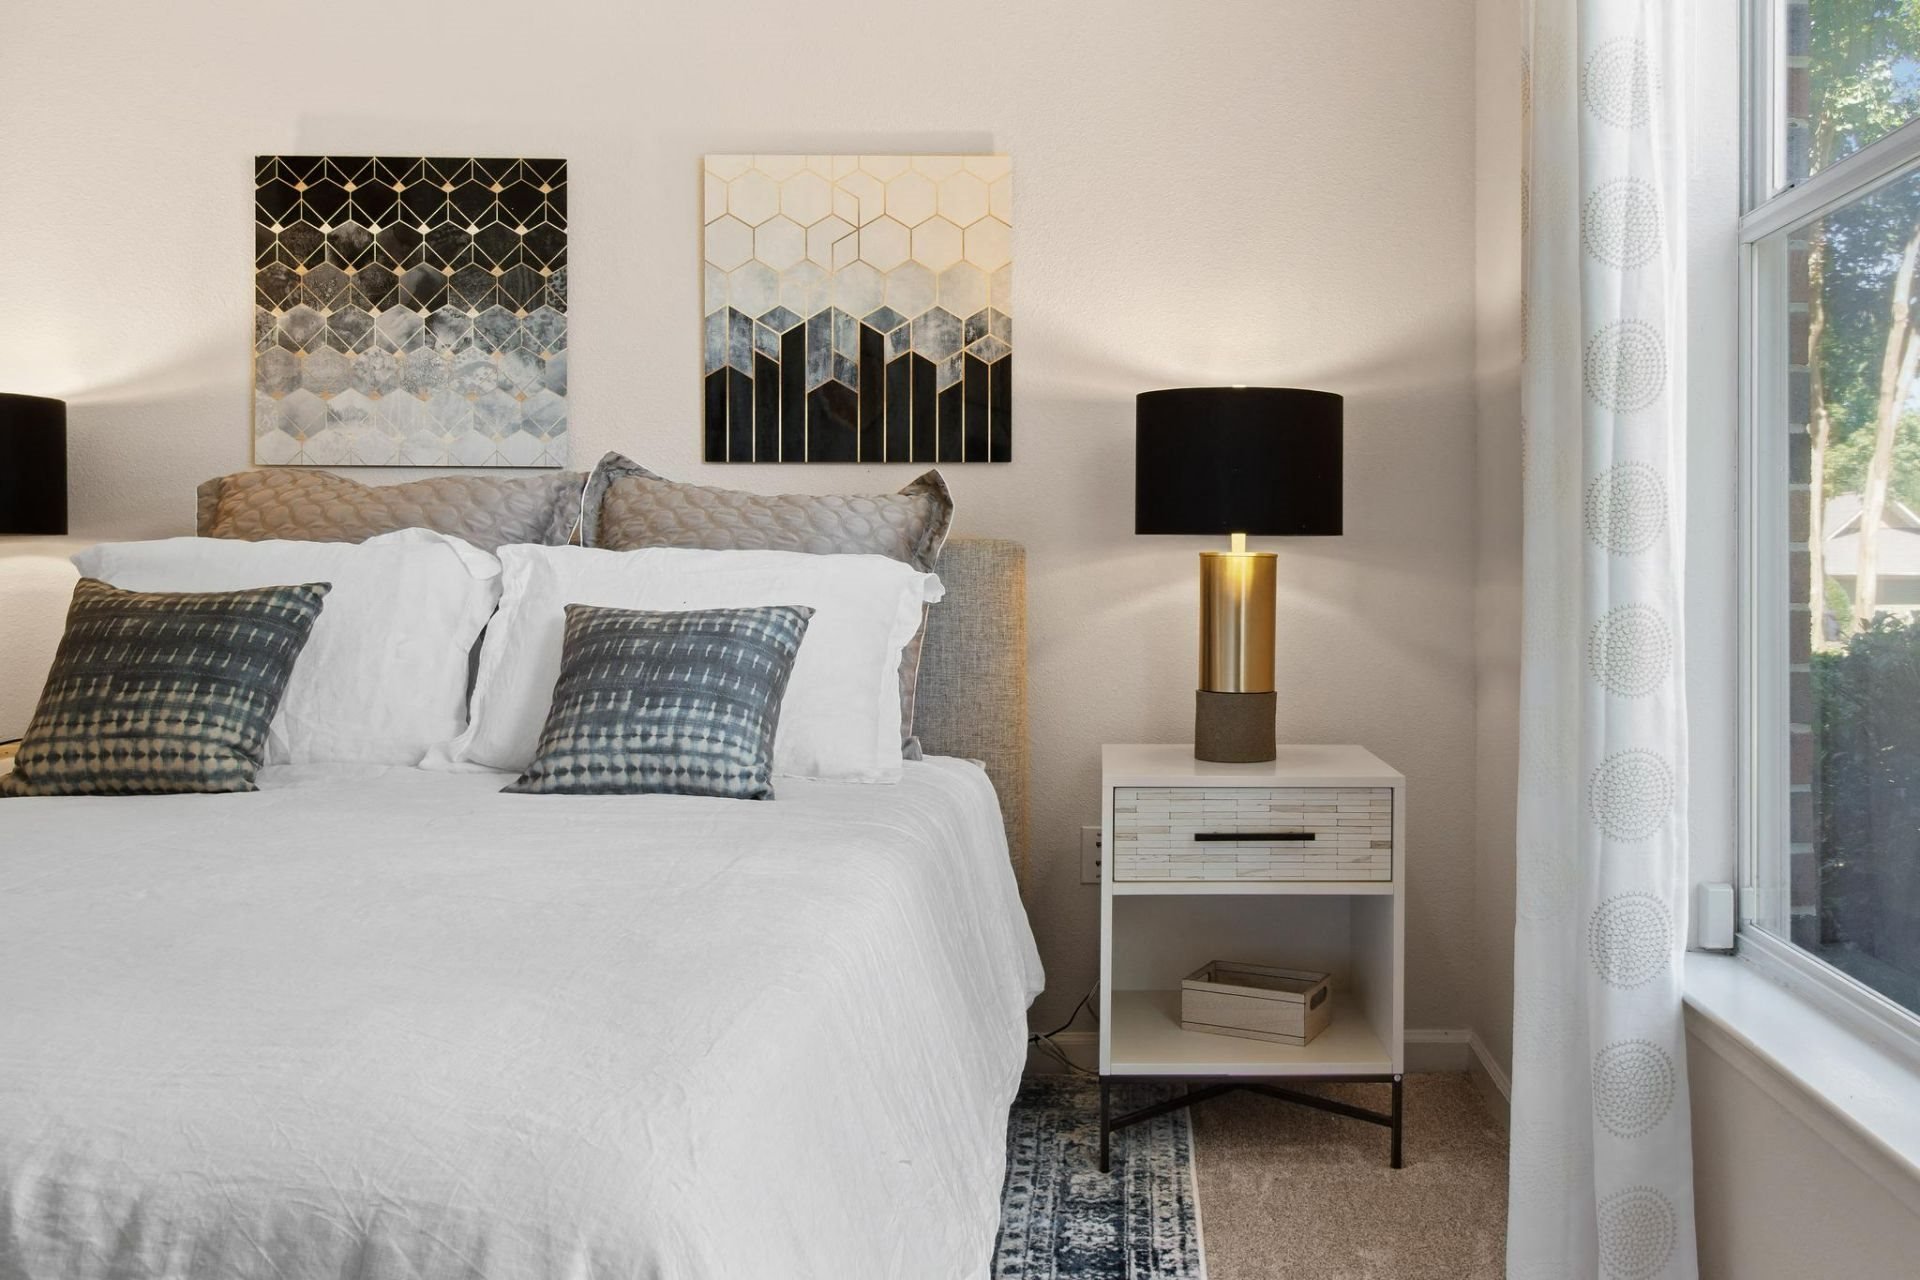 Master bedroom with closet space at Alden Place at South Square, Durham, North Carolina